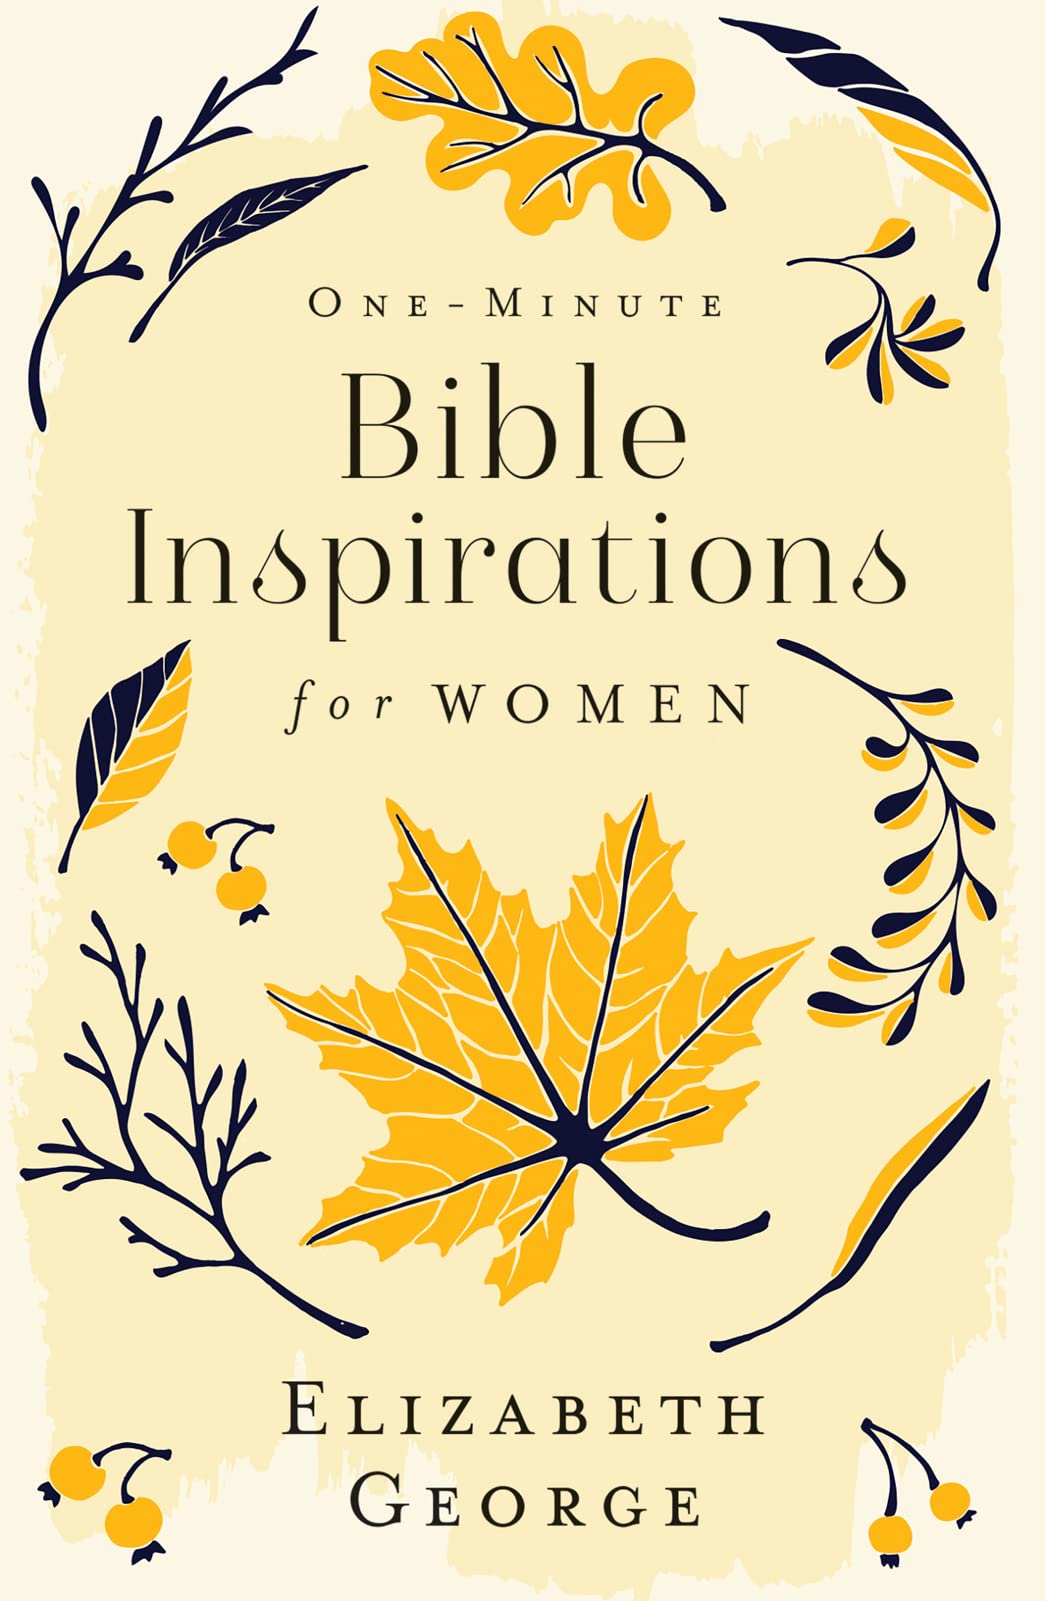 ONE MINUTE BIBLE INSPIRATIONS FOR WOMEN